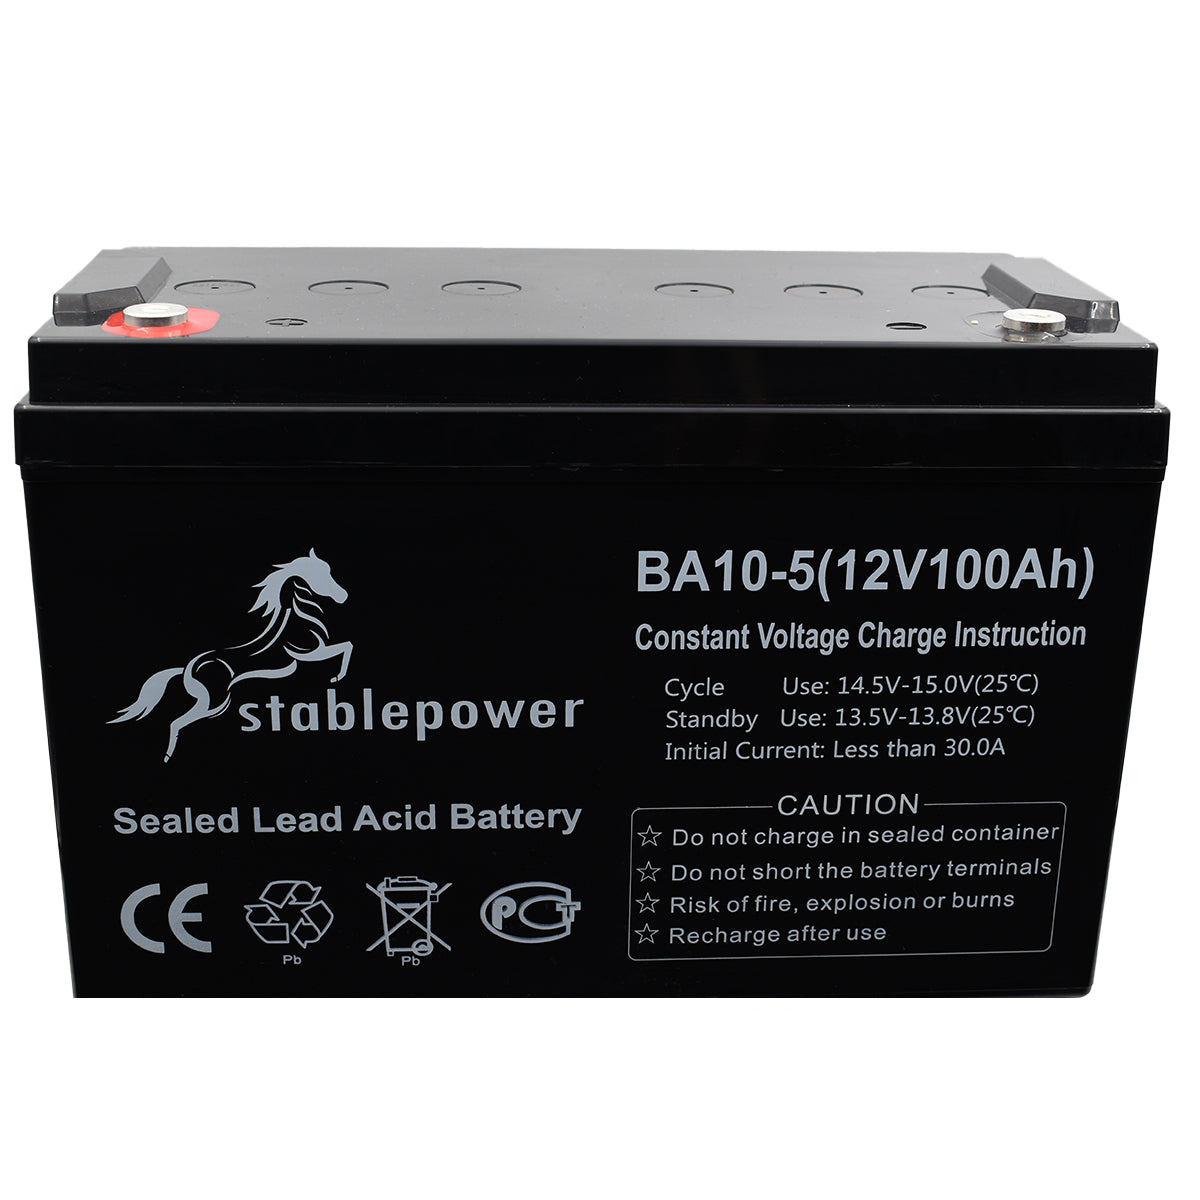 Stablepower 12V 100AH Rechargeable Sealed Lead Acid Battery Image 1 BA10-5